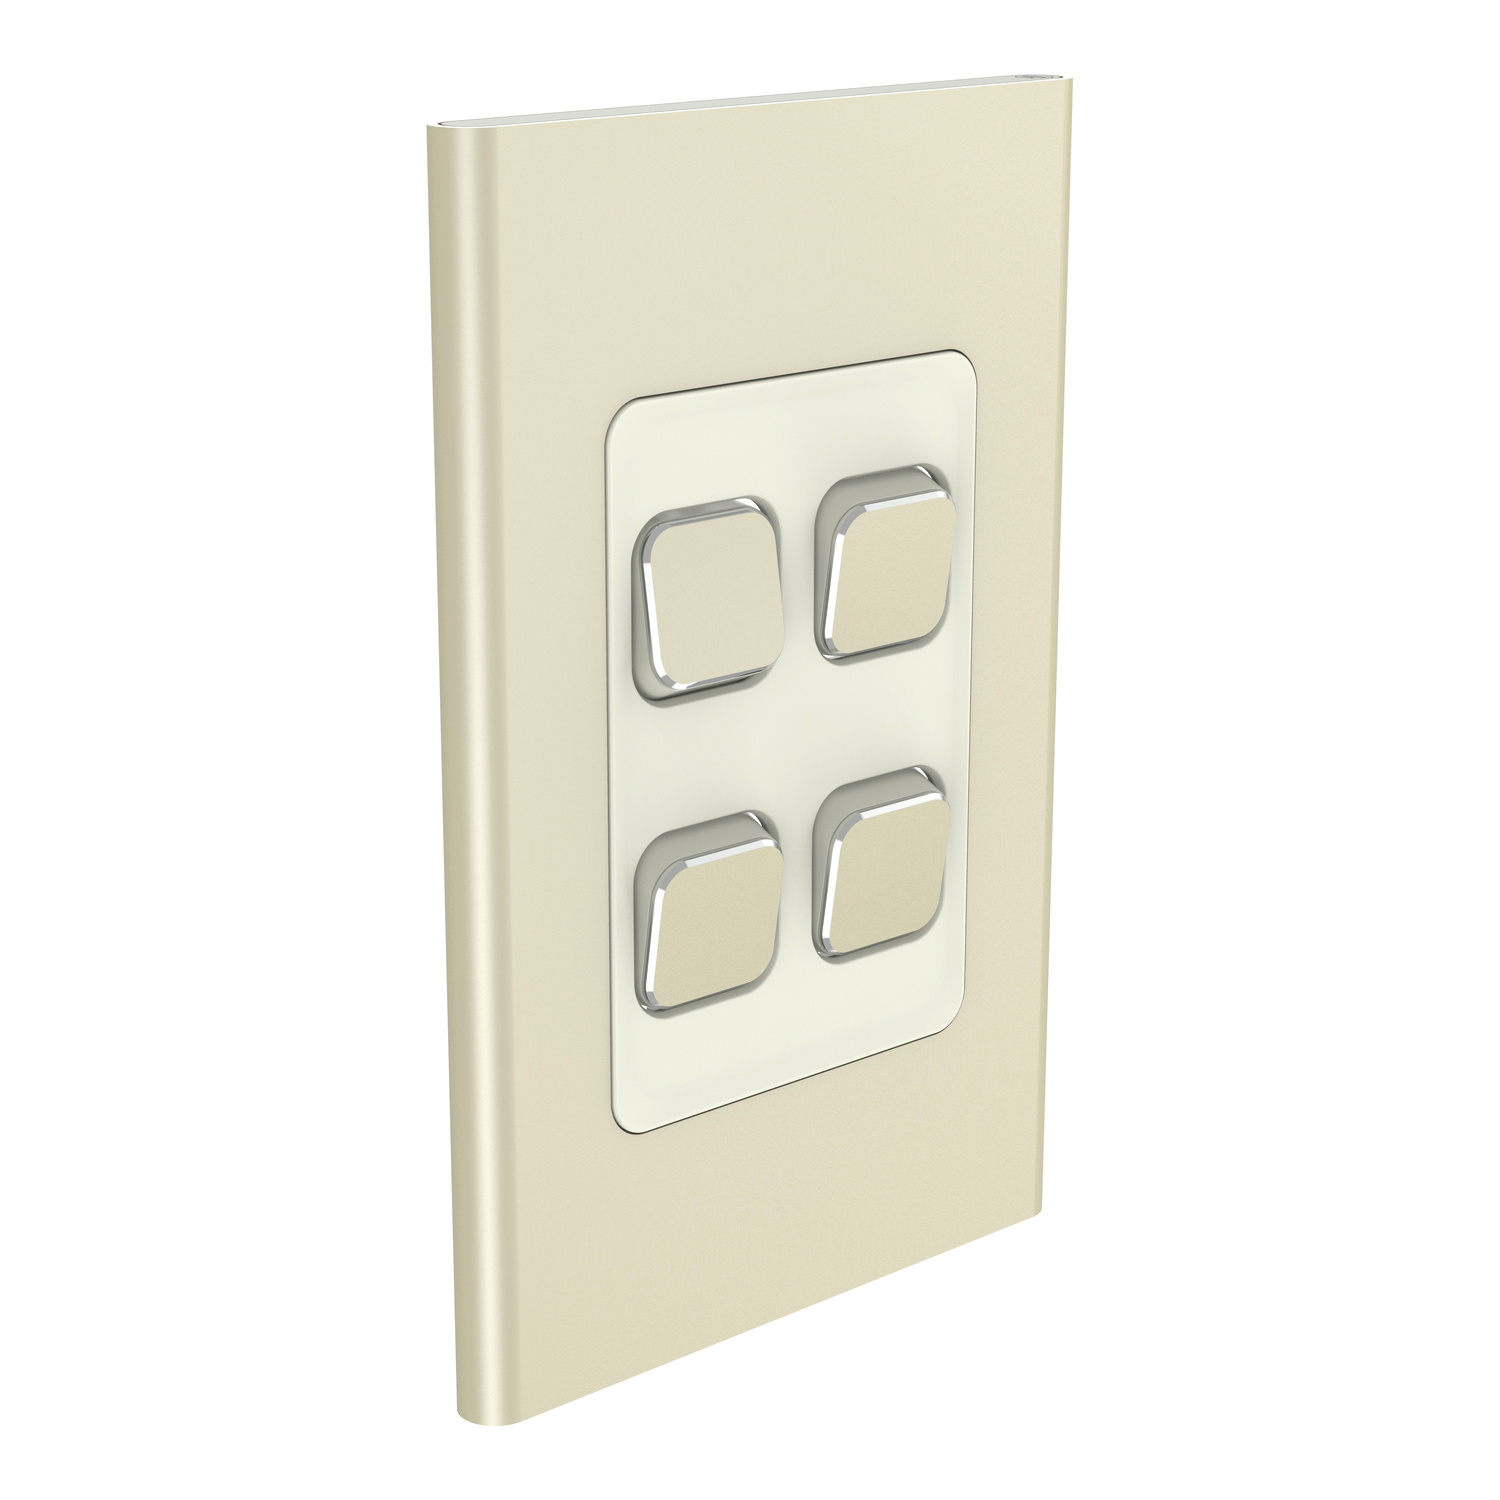 PDL Iconic Styl - Cover Plate Switch 4-Gang - Crowne